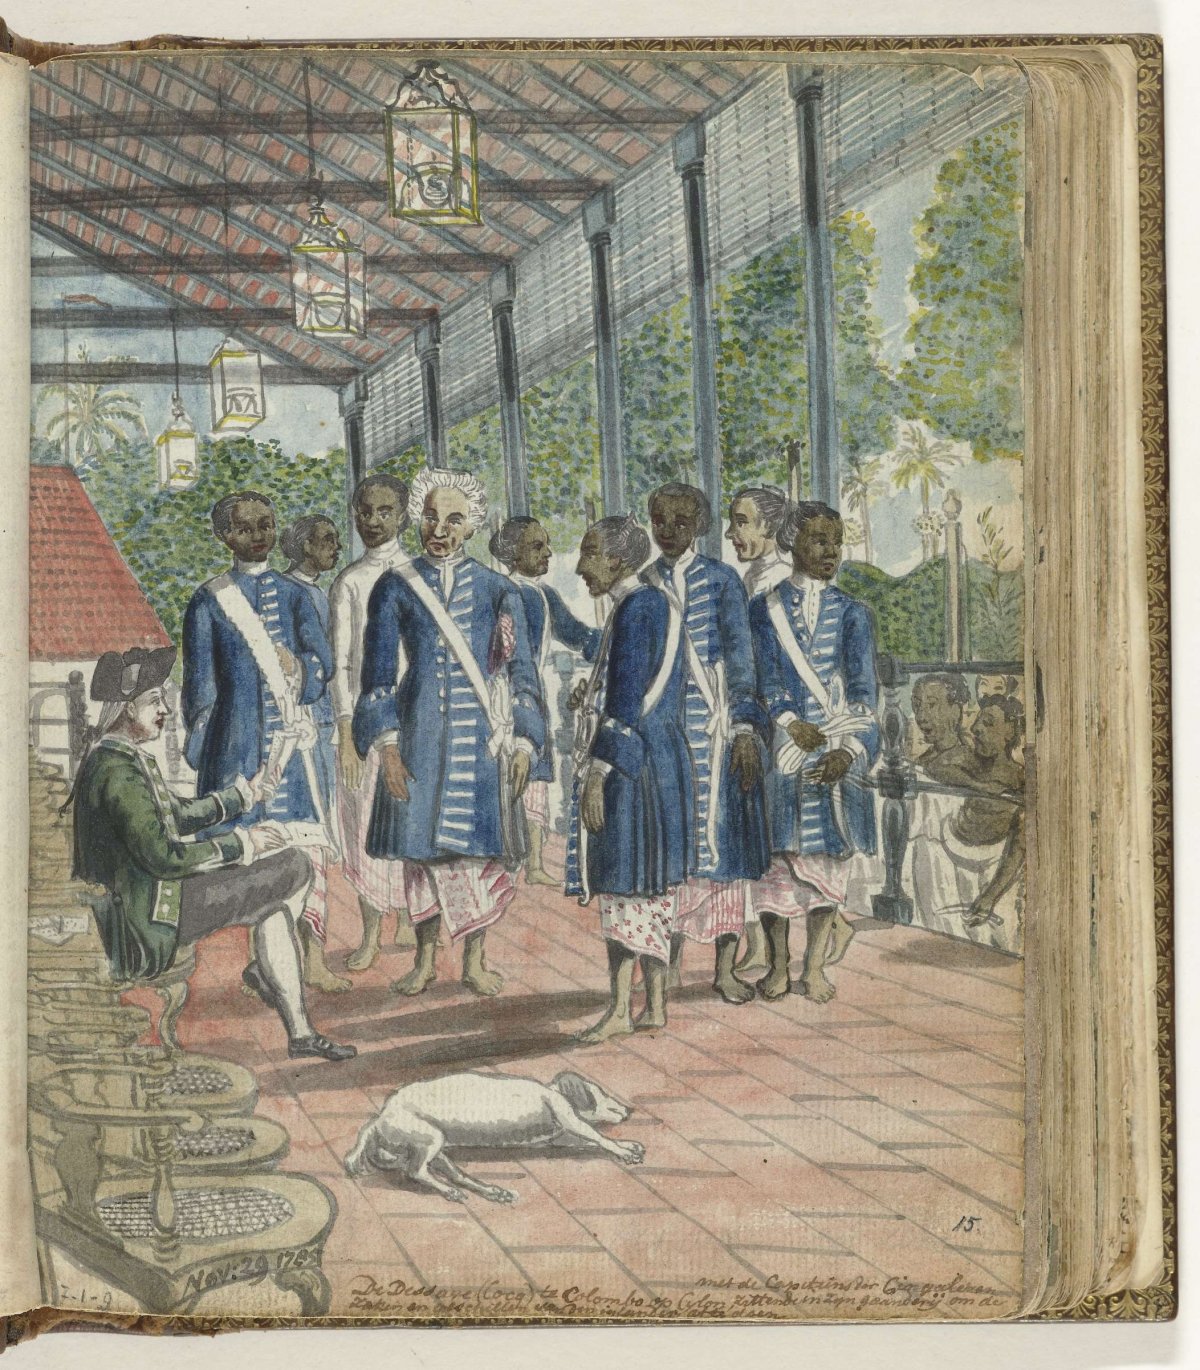 Dessave De Cock and his officers at Hulftsdorp, Jan Brandes, 1785